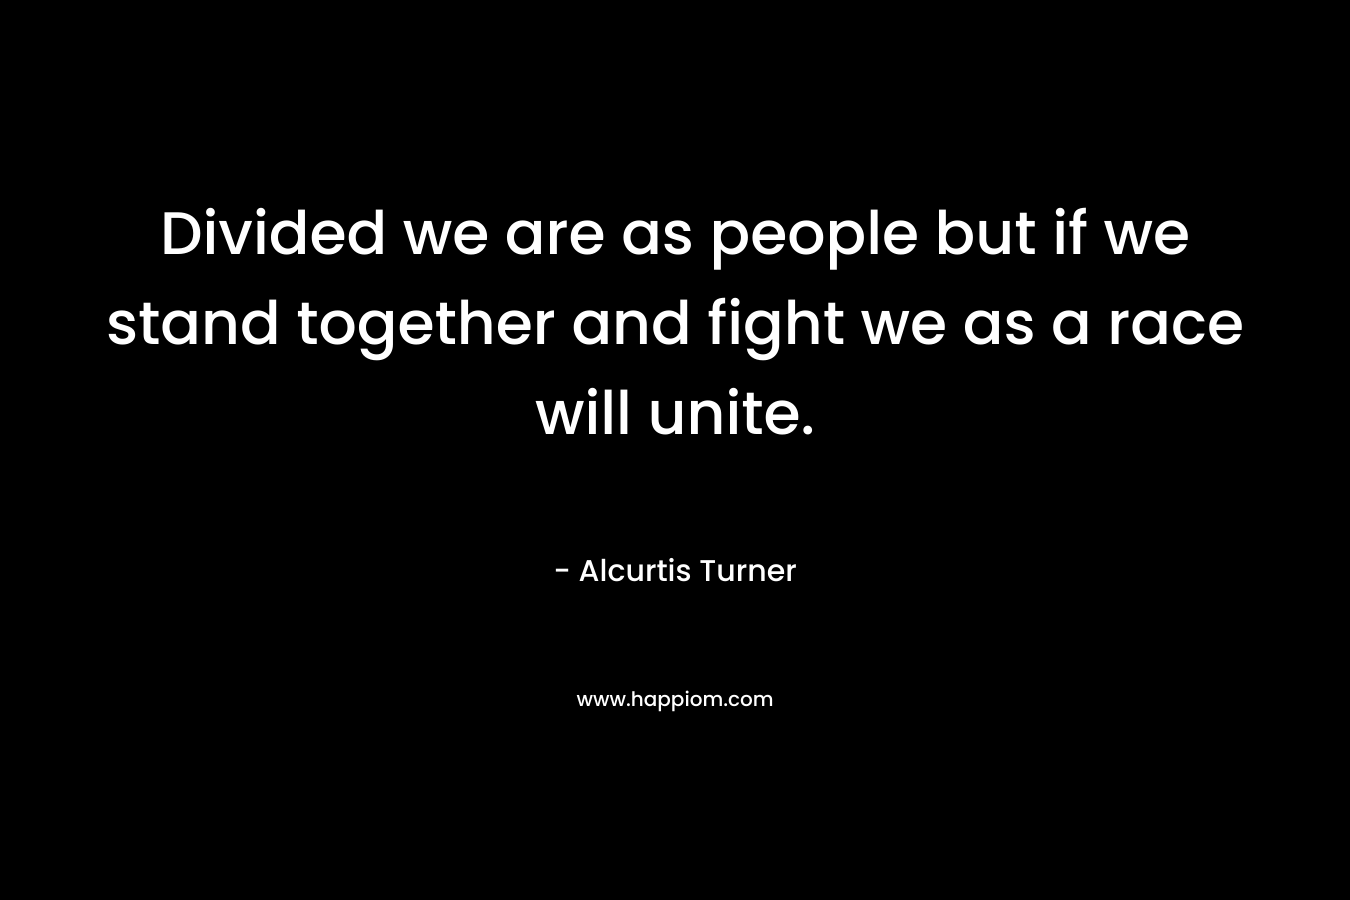 Divided we are as people but if we stand together and fight we as a race will unite.